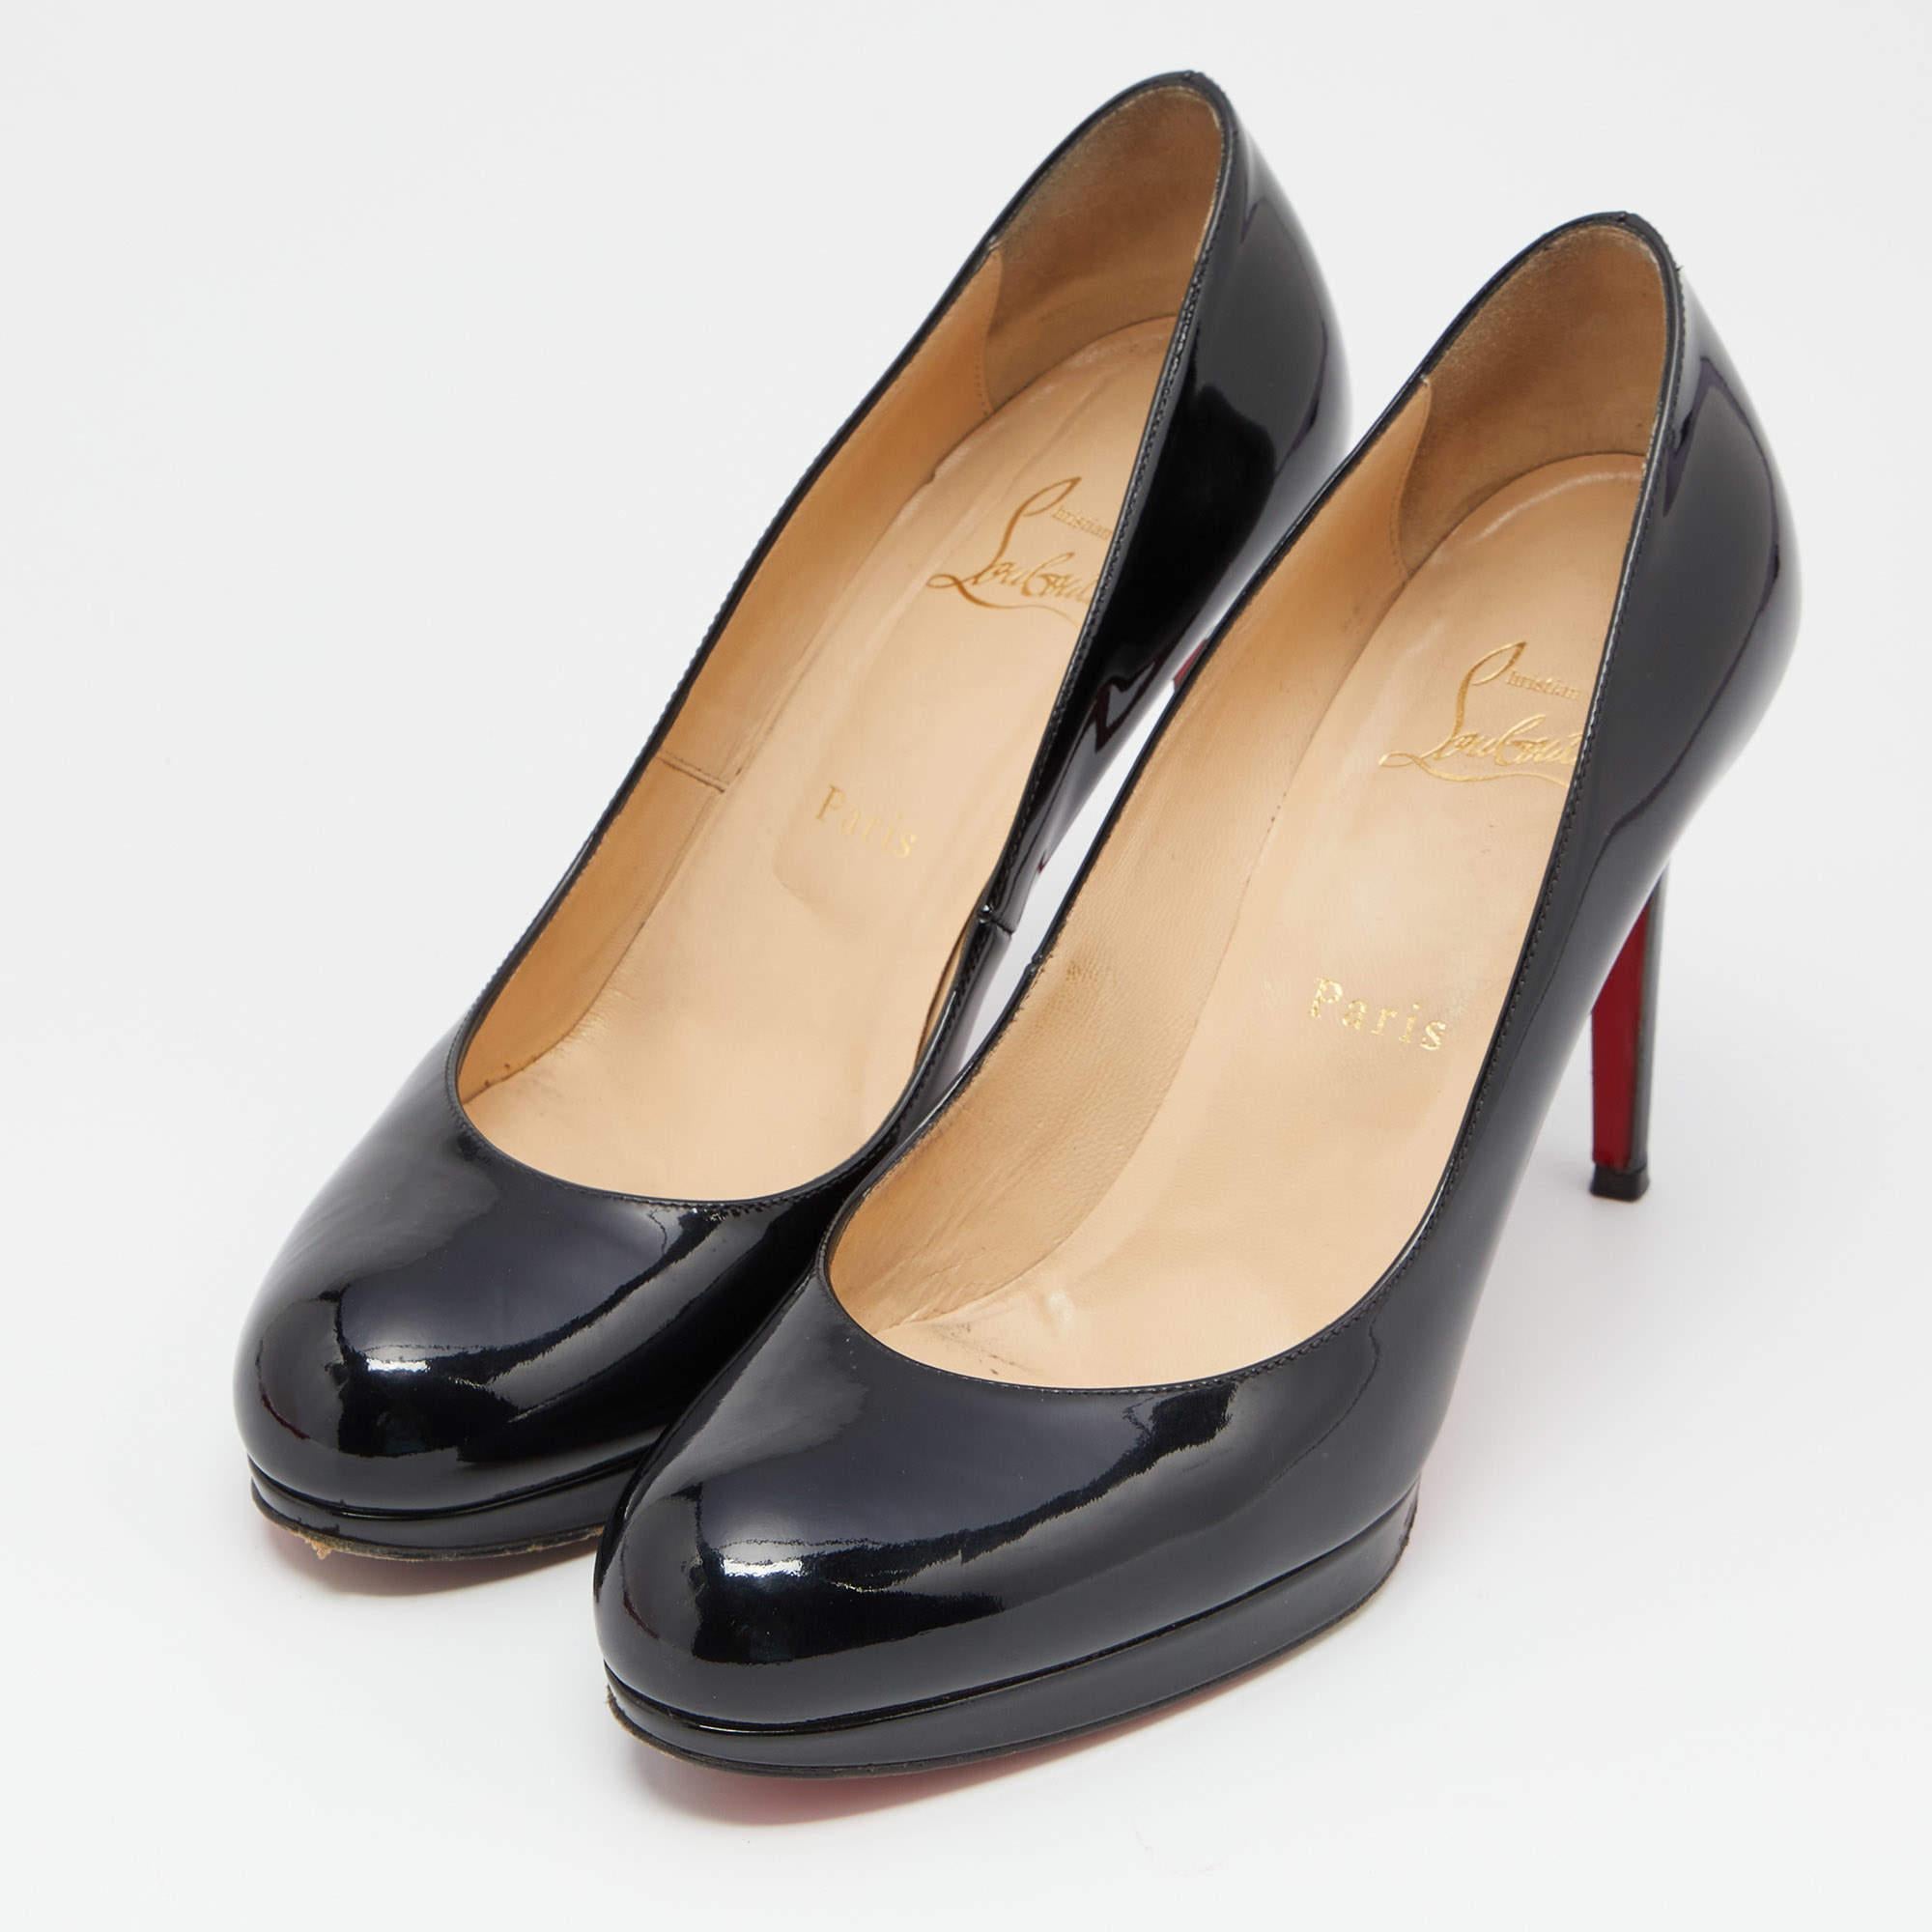 Christian Louboutin Black Patent Leather New Simple Pumps Size 38.5 For Sale 2